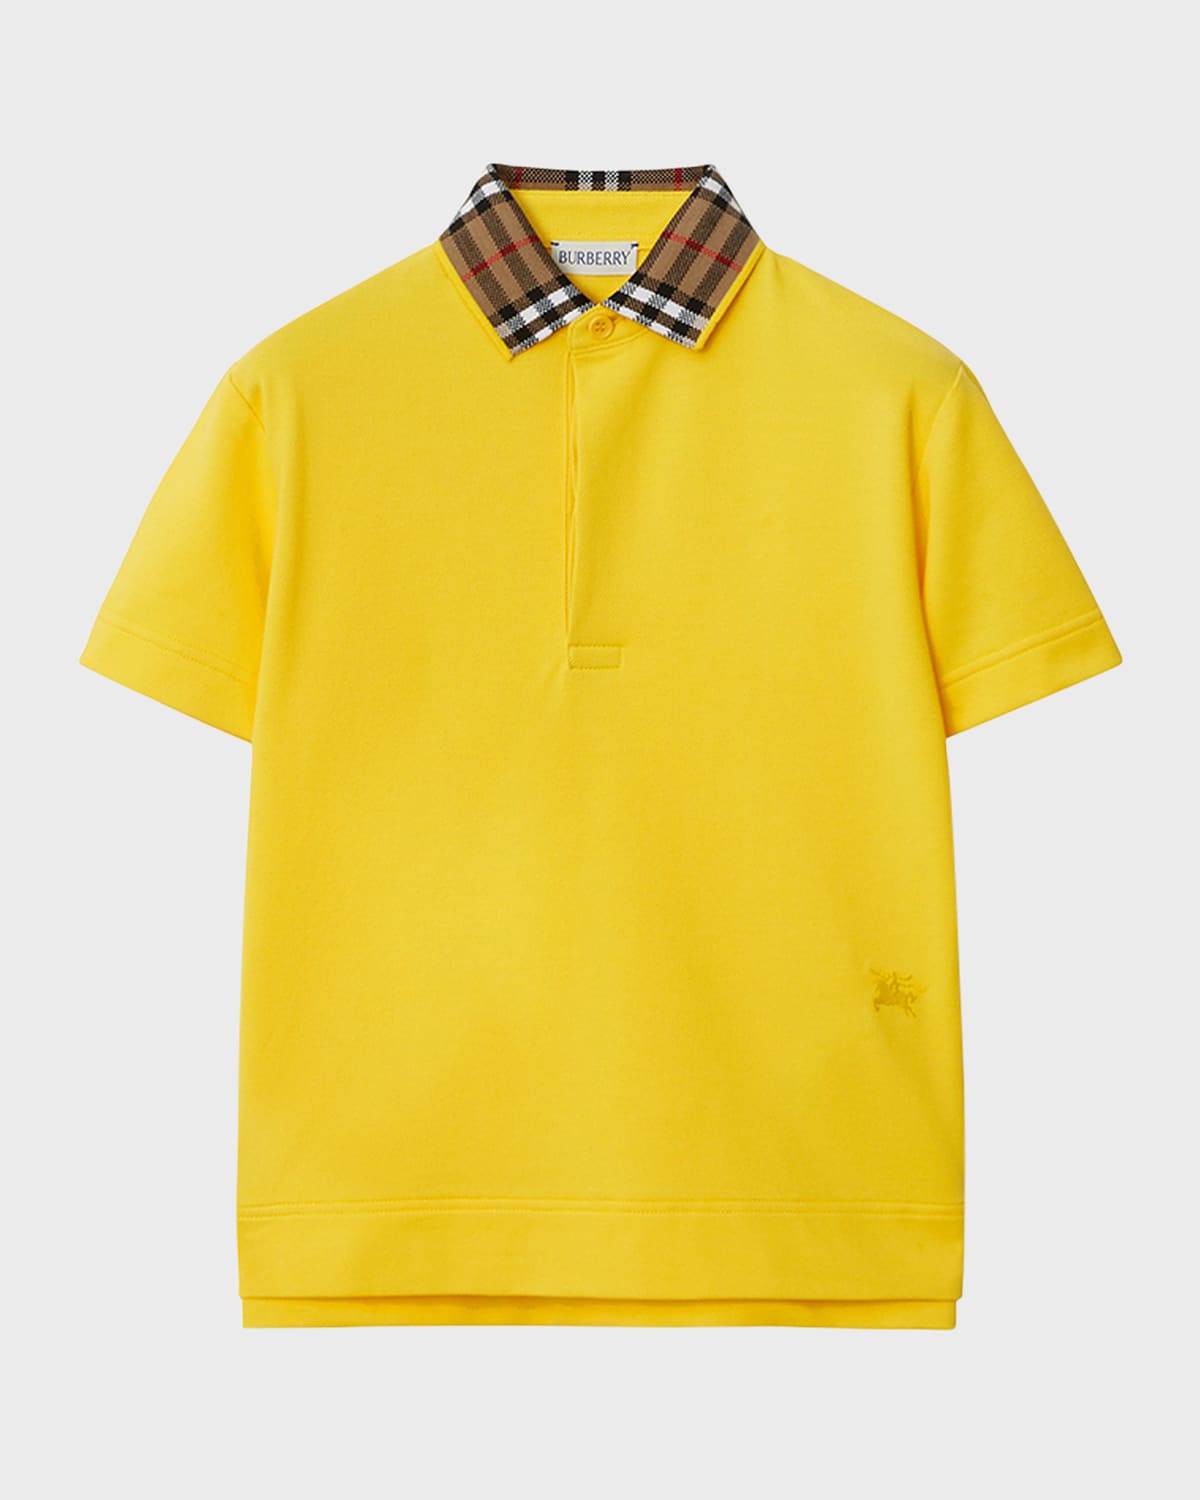 Burberry Kids' Boy's Johane Ekd Embroidered Shirt With Check Knitted Collar In Gorse Yellow